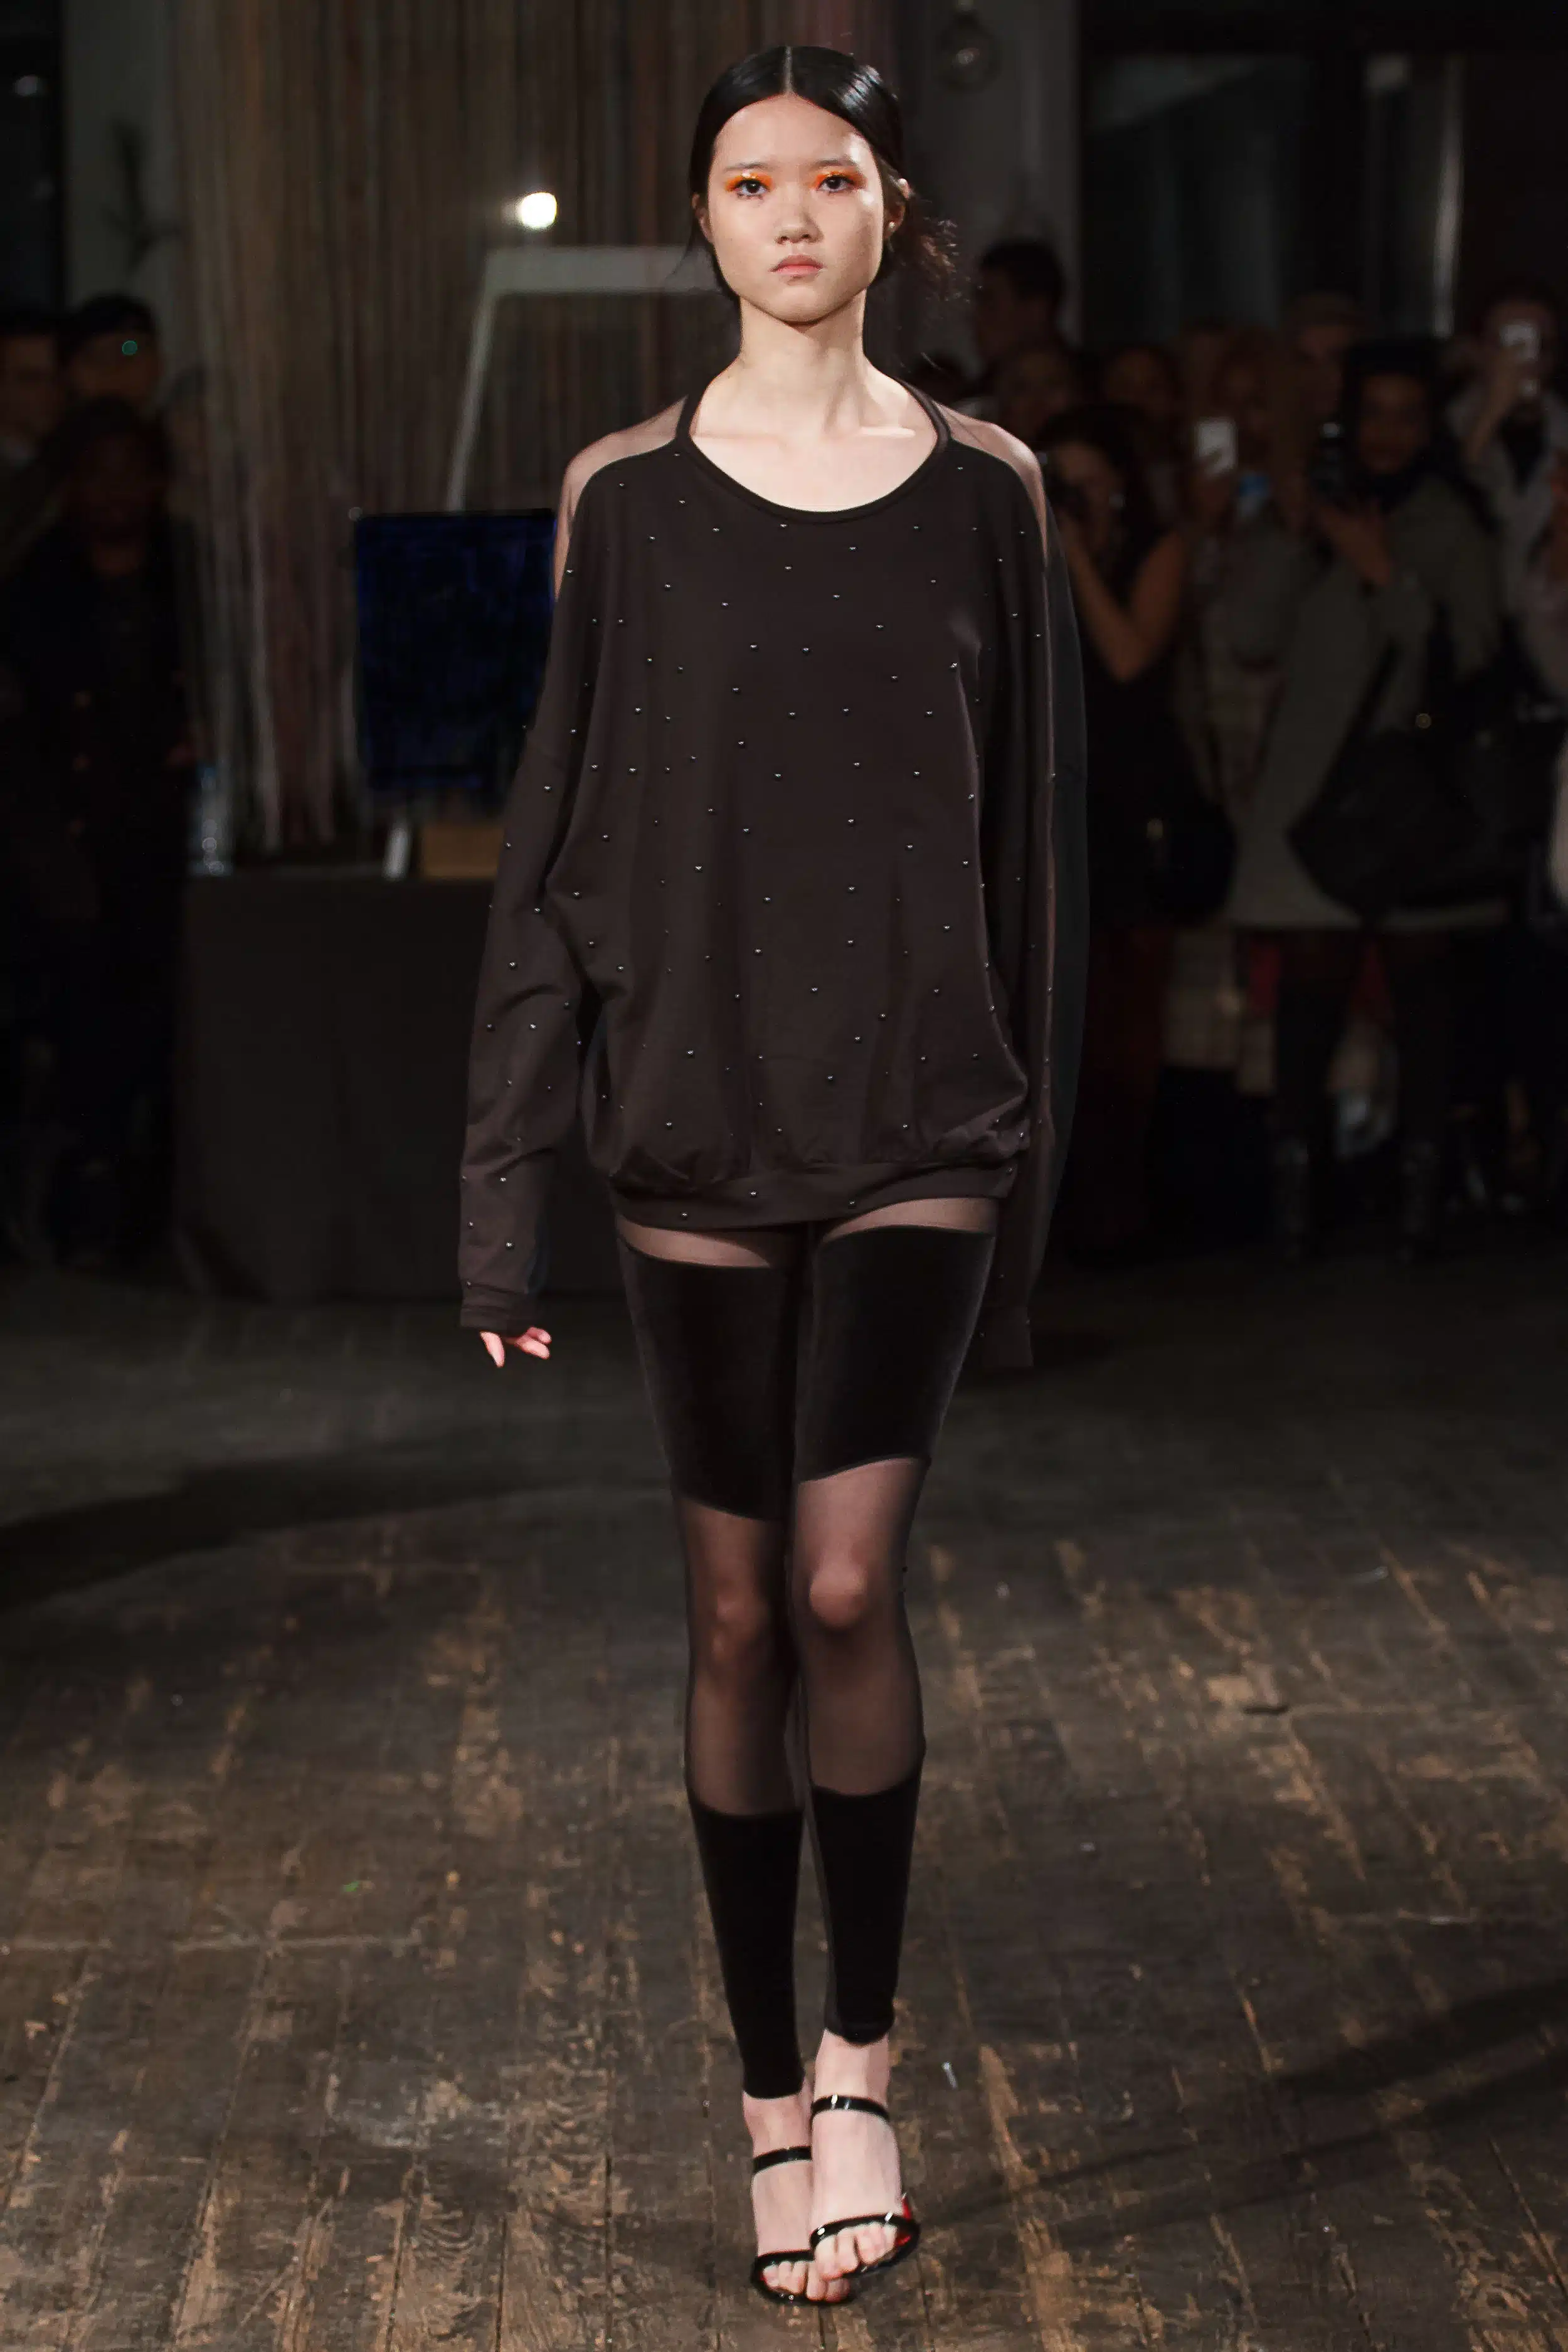 Image from FW17 SHOW Collection